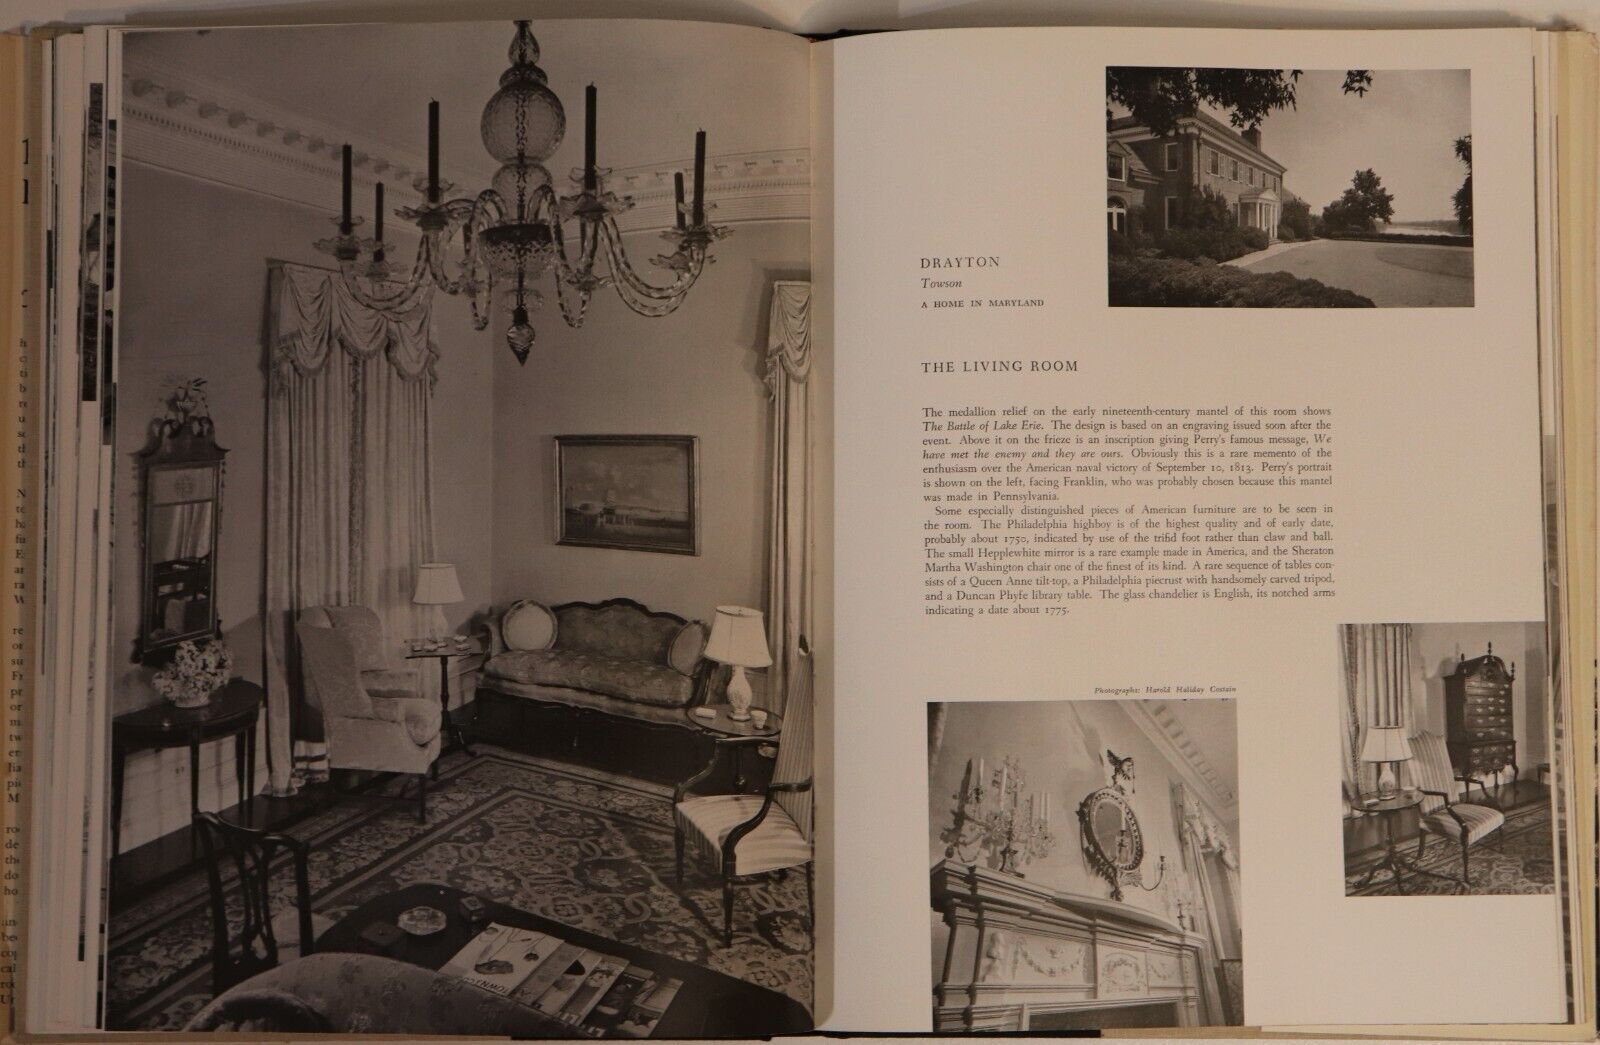 100 Most Beautiful Rooms In America - 1965 - Vintage Architecture Book